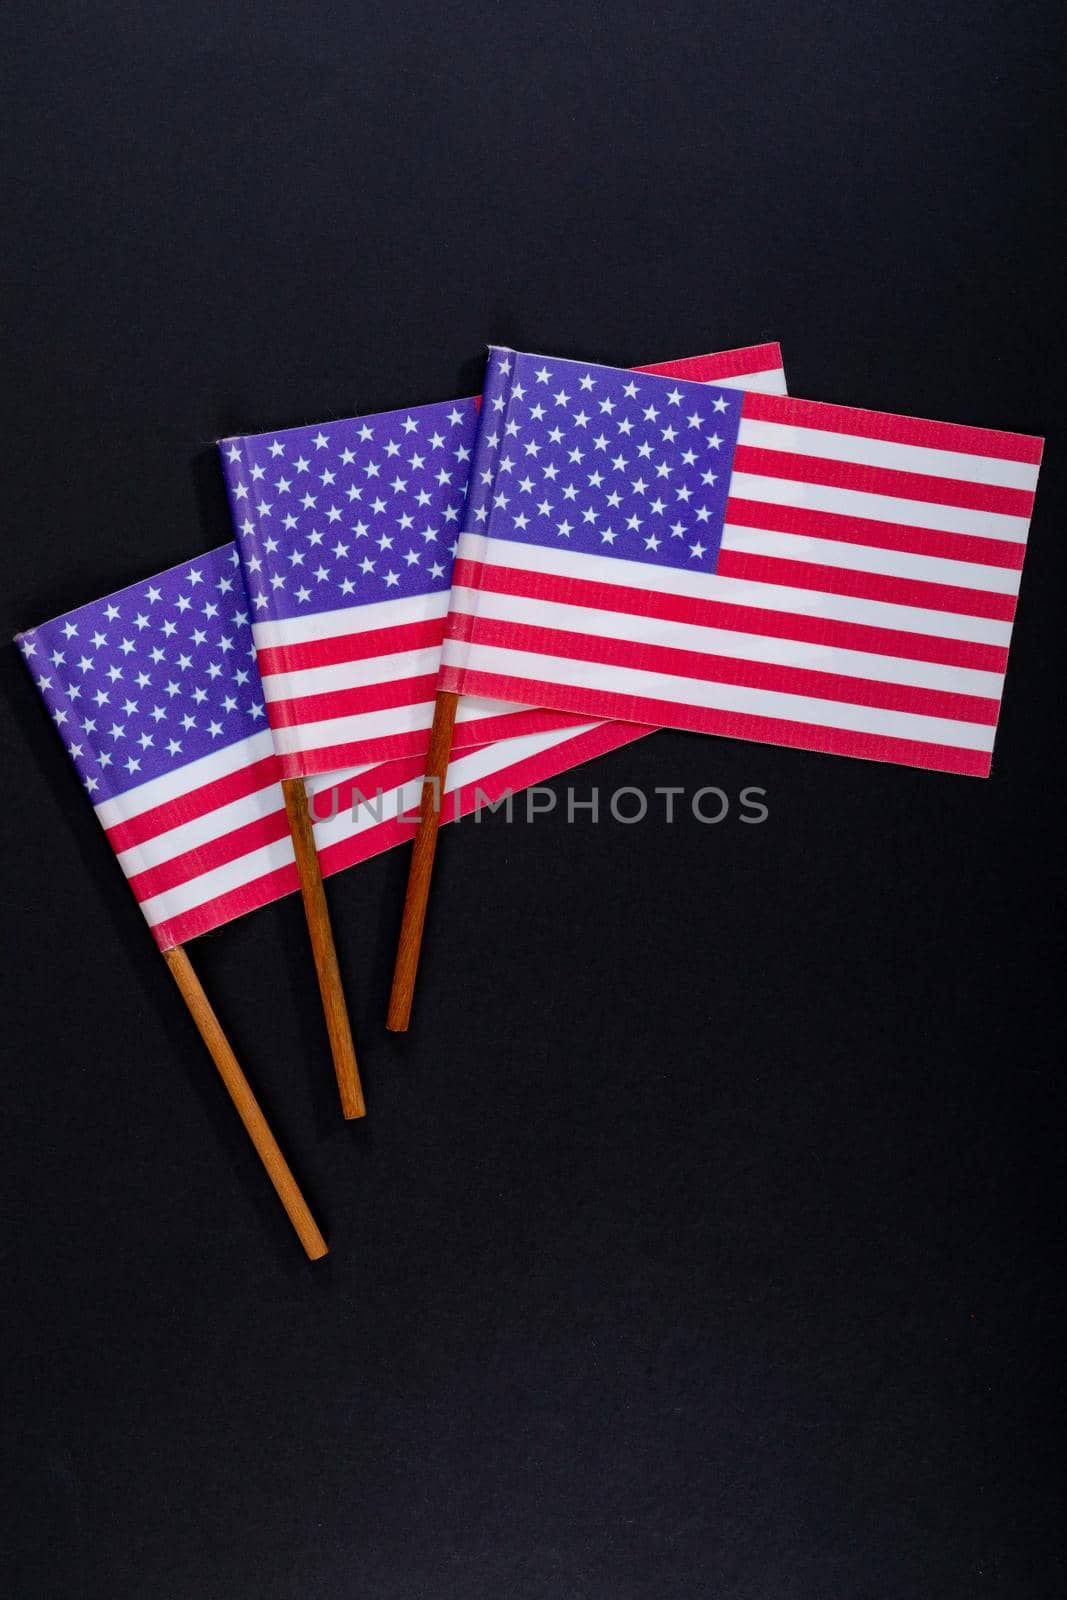 Red and white stripes along with stars on america flag sticks on black background. patriotism and identity with copy space.